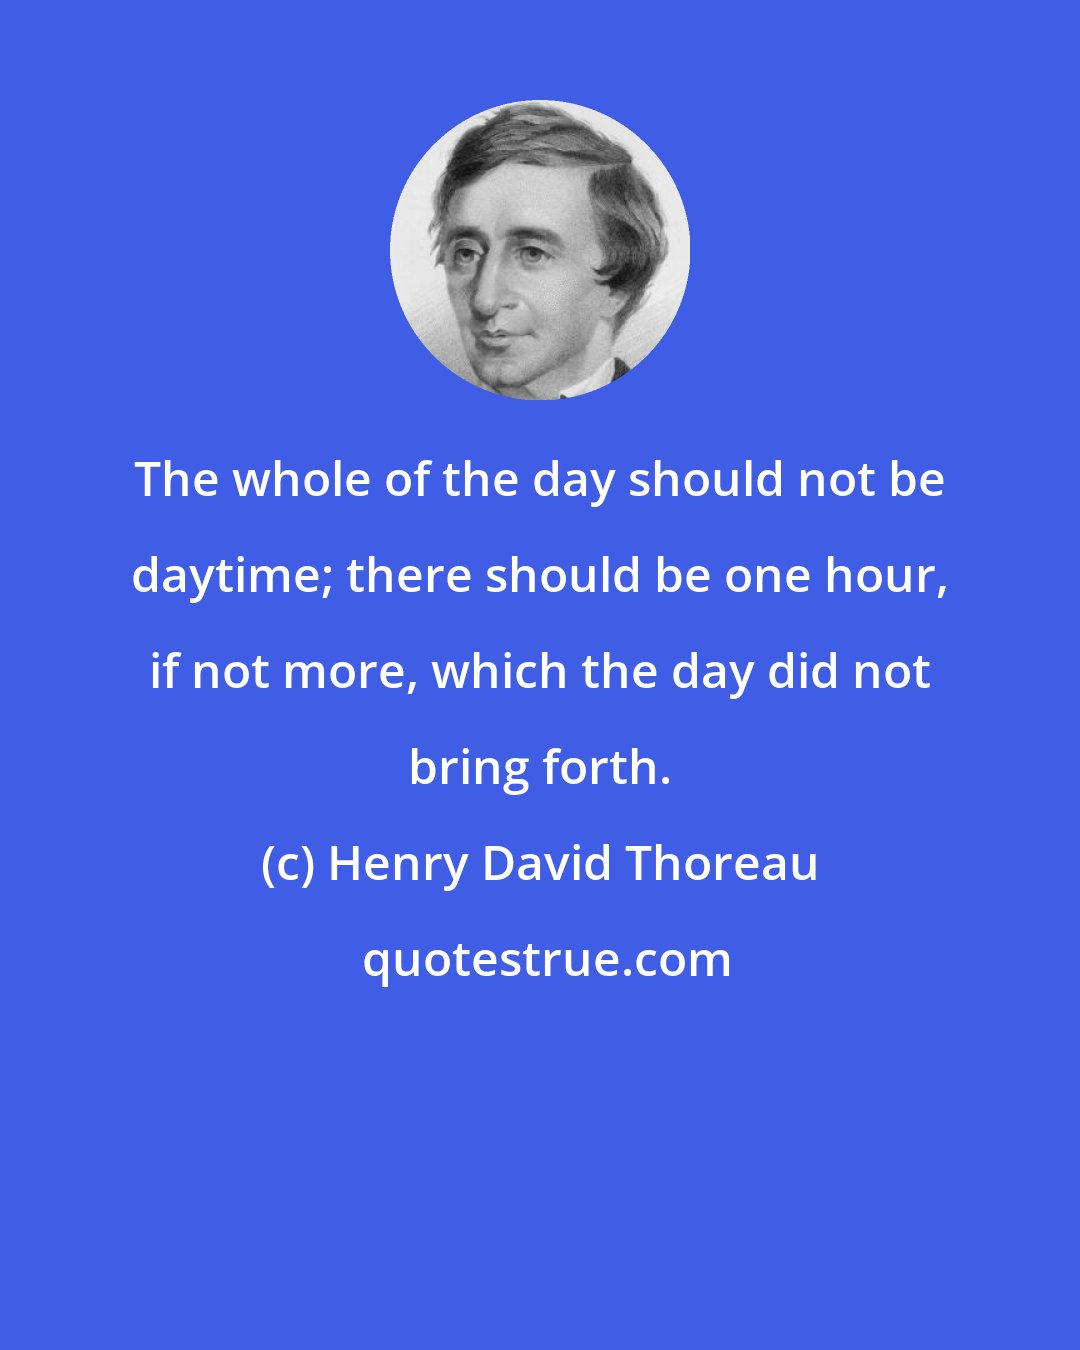 Henry David Thoreau: The whole of the day should not be daytime; there should be one hour, if not more, which the day did not bring forth.